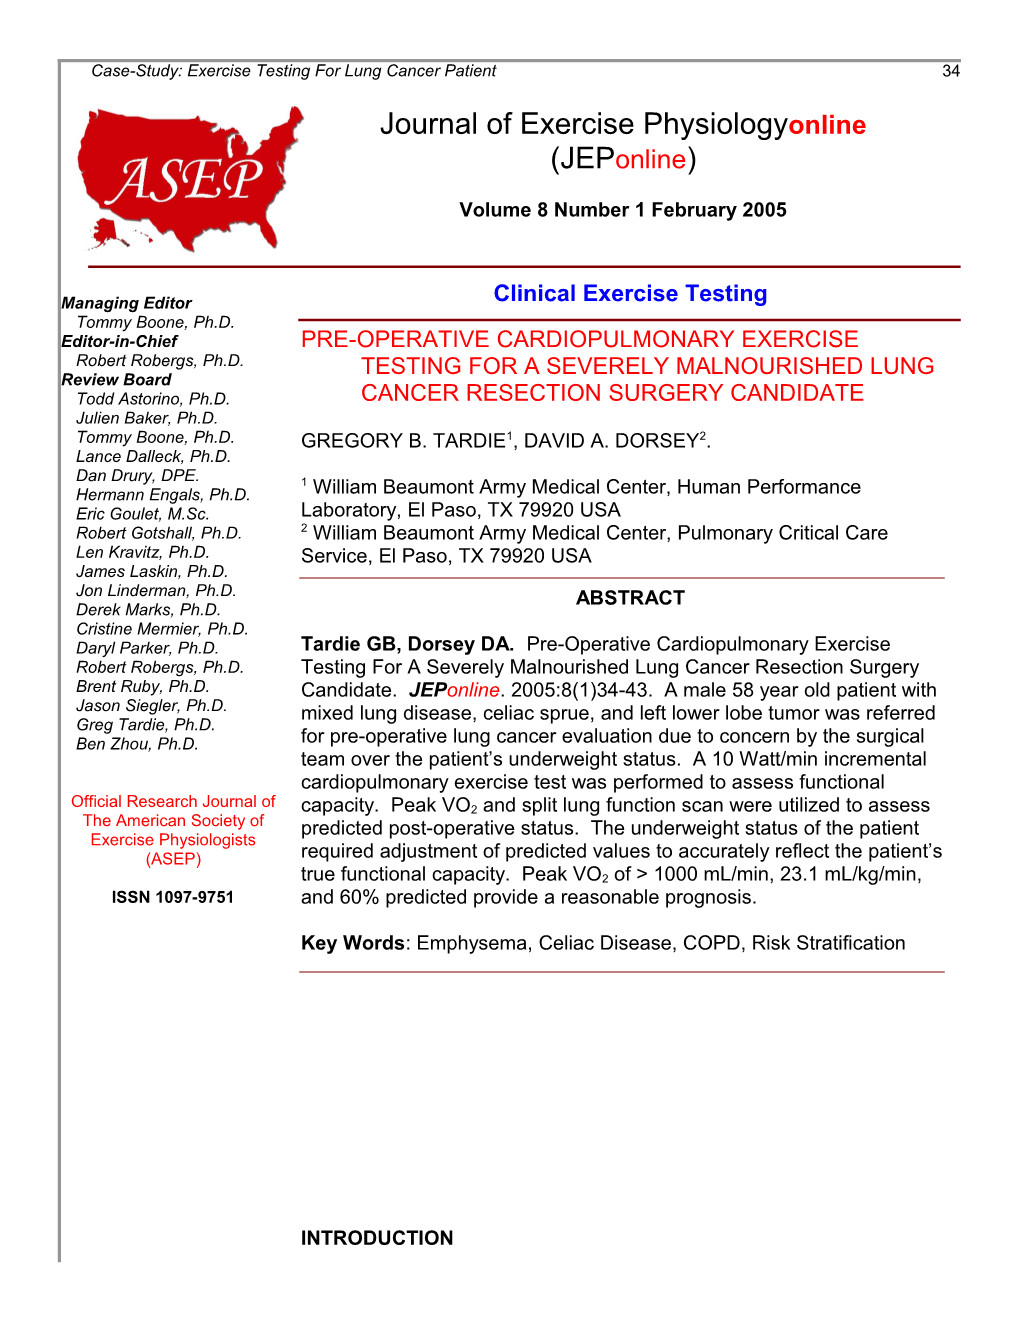 Case-Study: Exercise Testing for Lung Cancer Patient